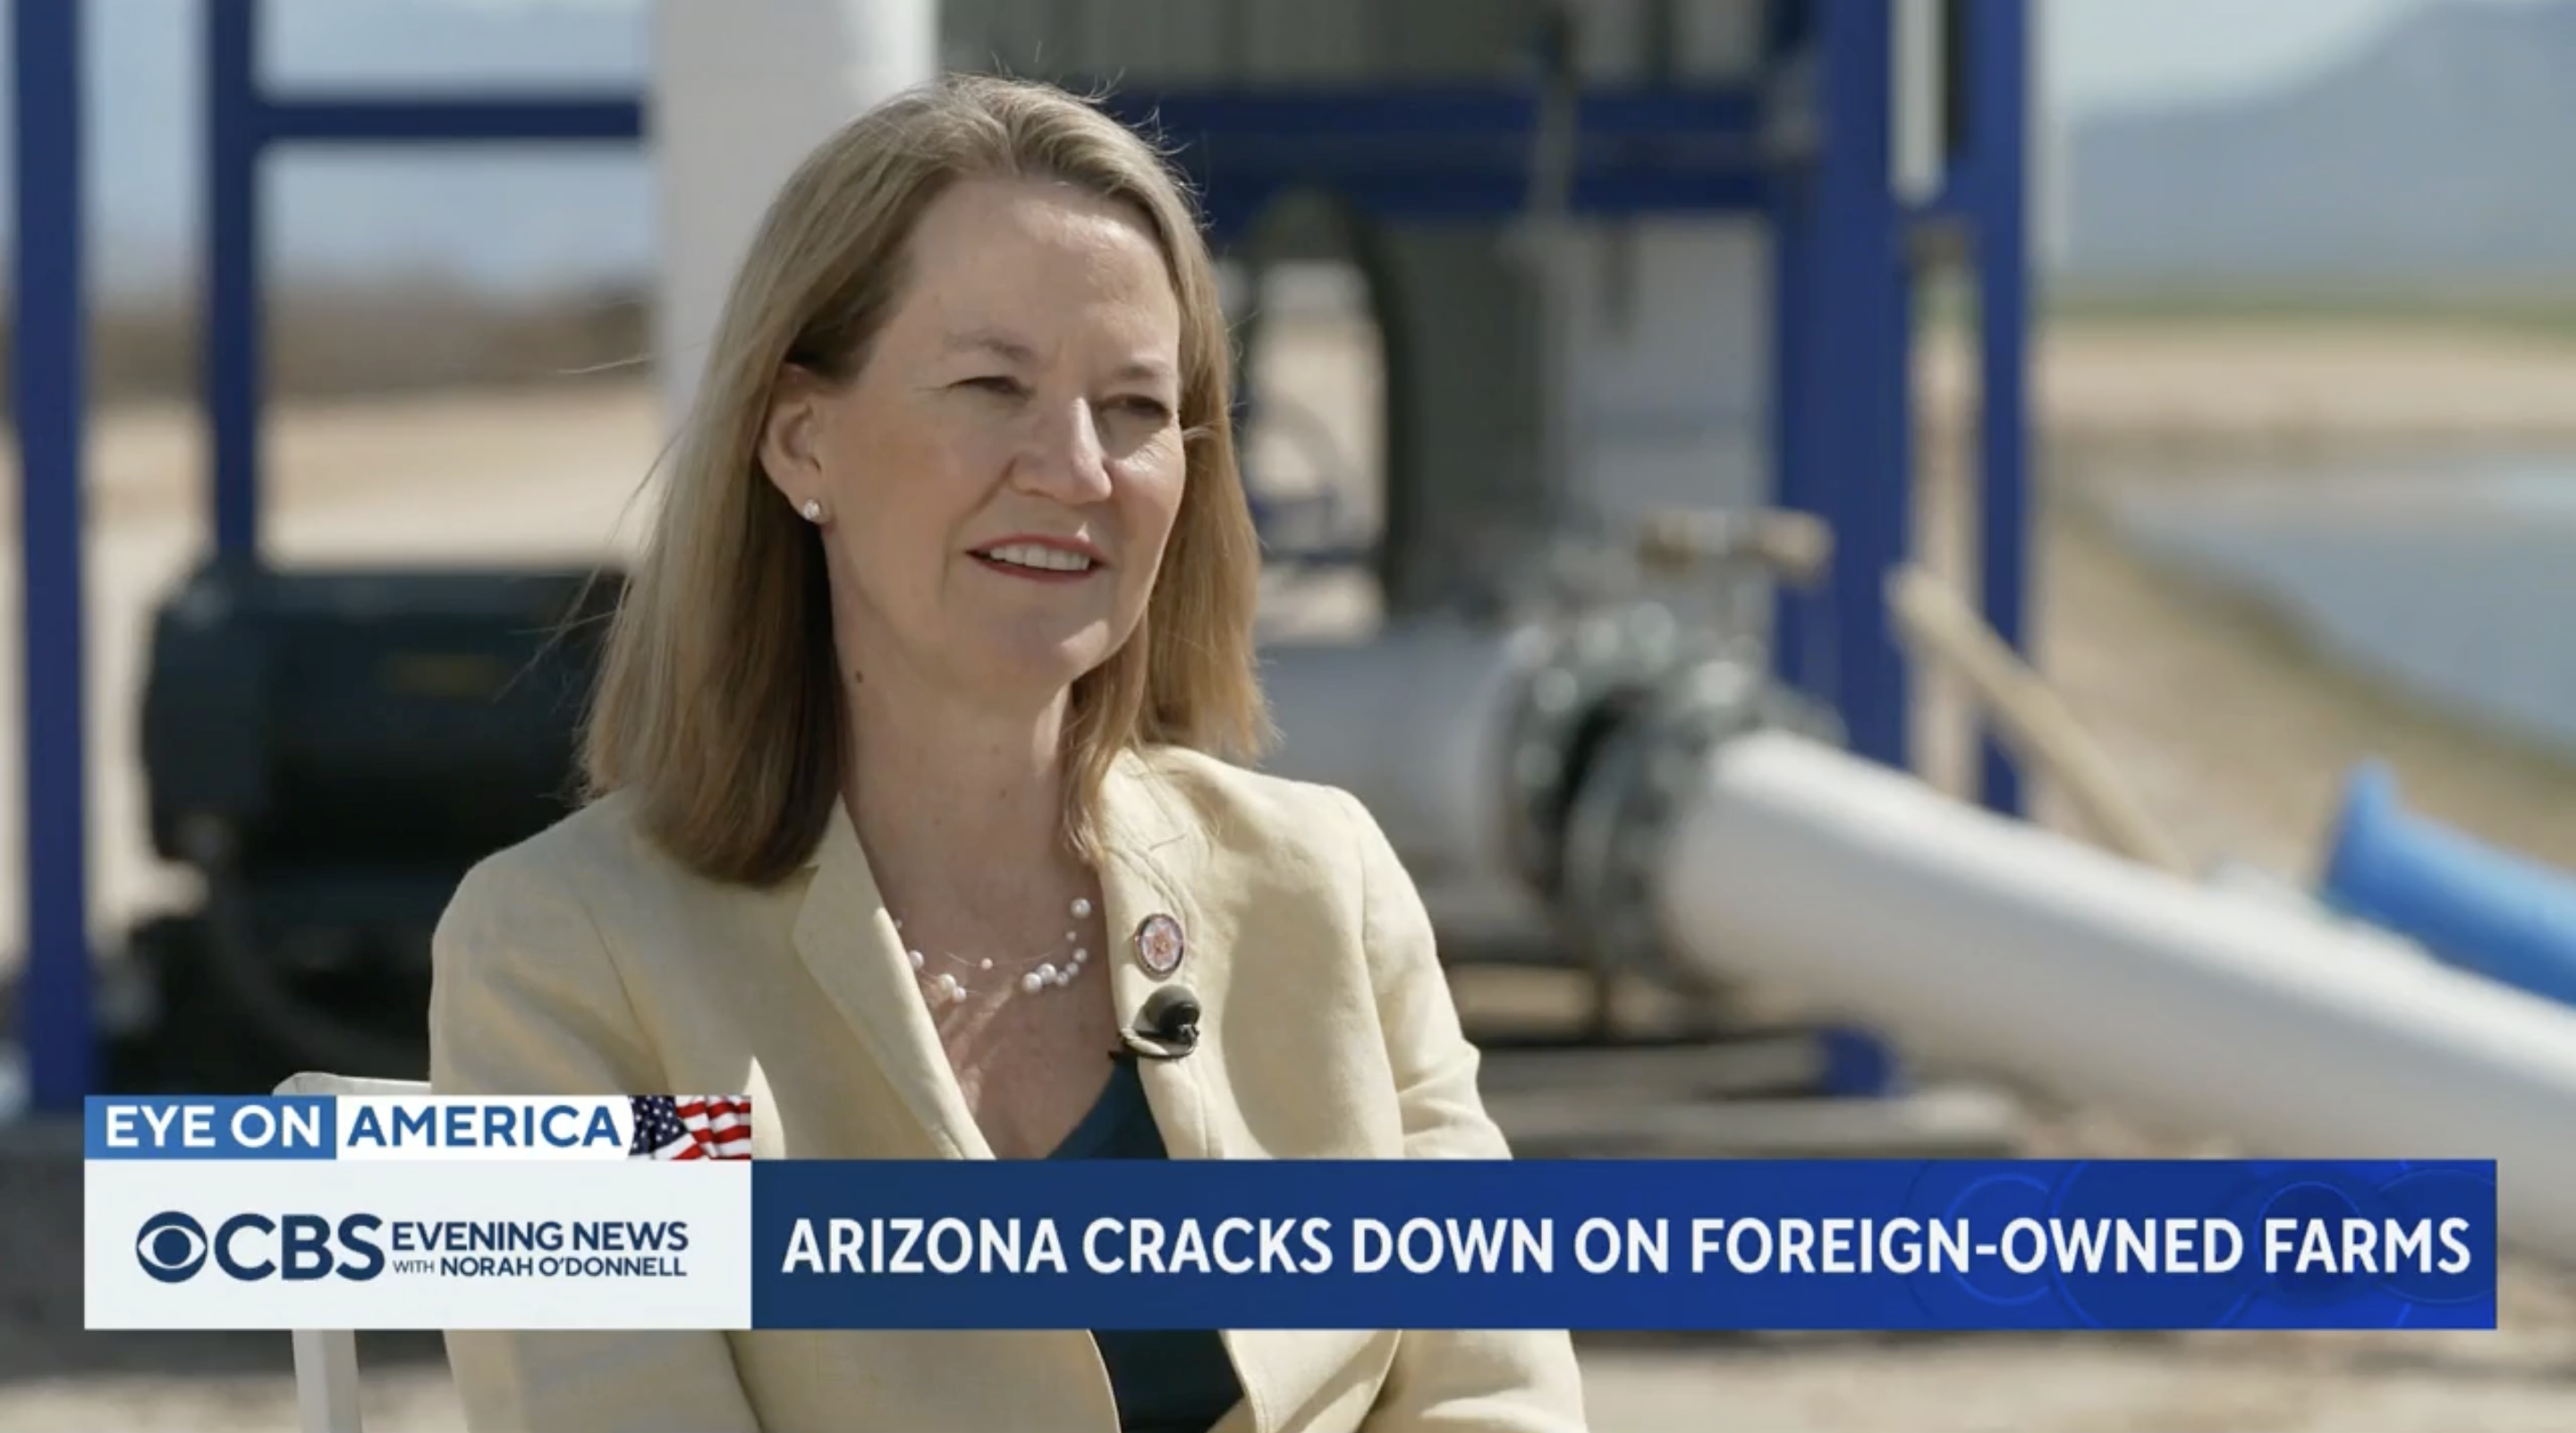 Kris Mayes during an interview about Arizona cracking down on foreign owned farms.